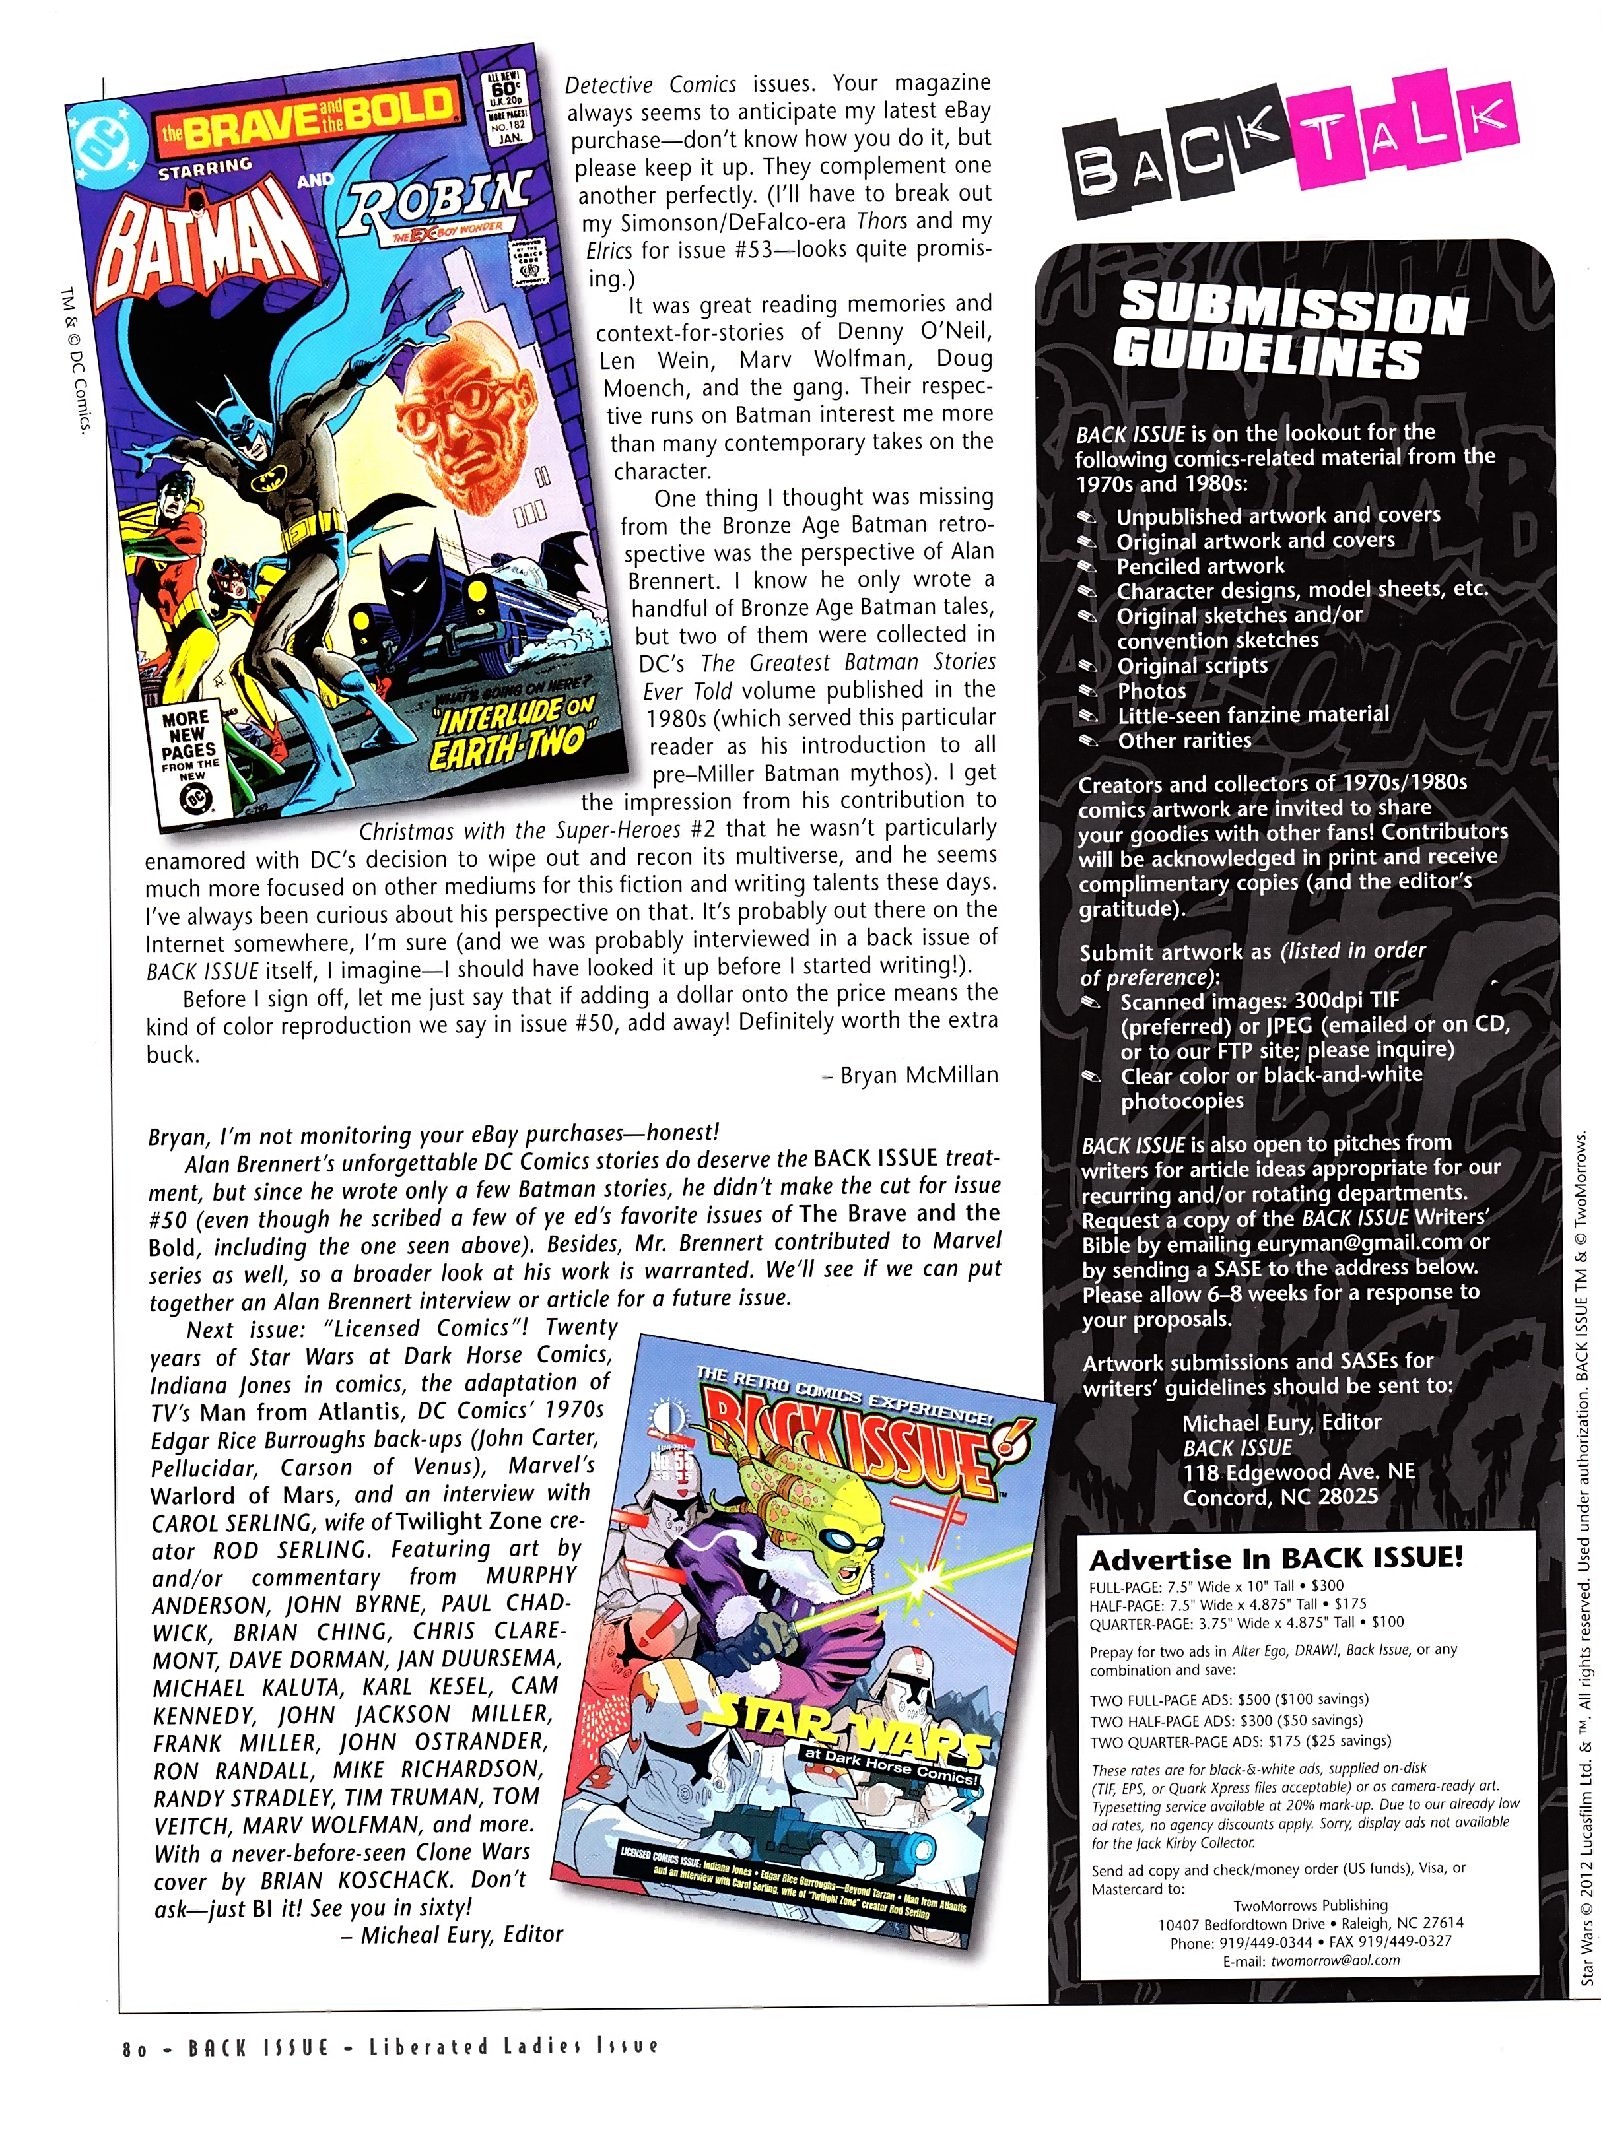 Read online Back Issue comic -  Issue #54 - 79